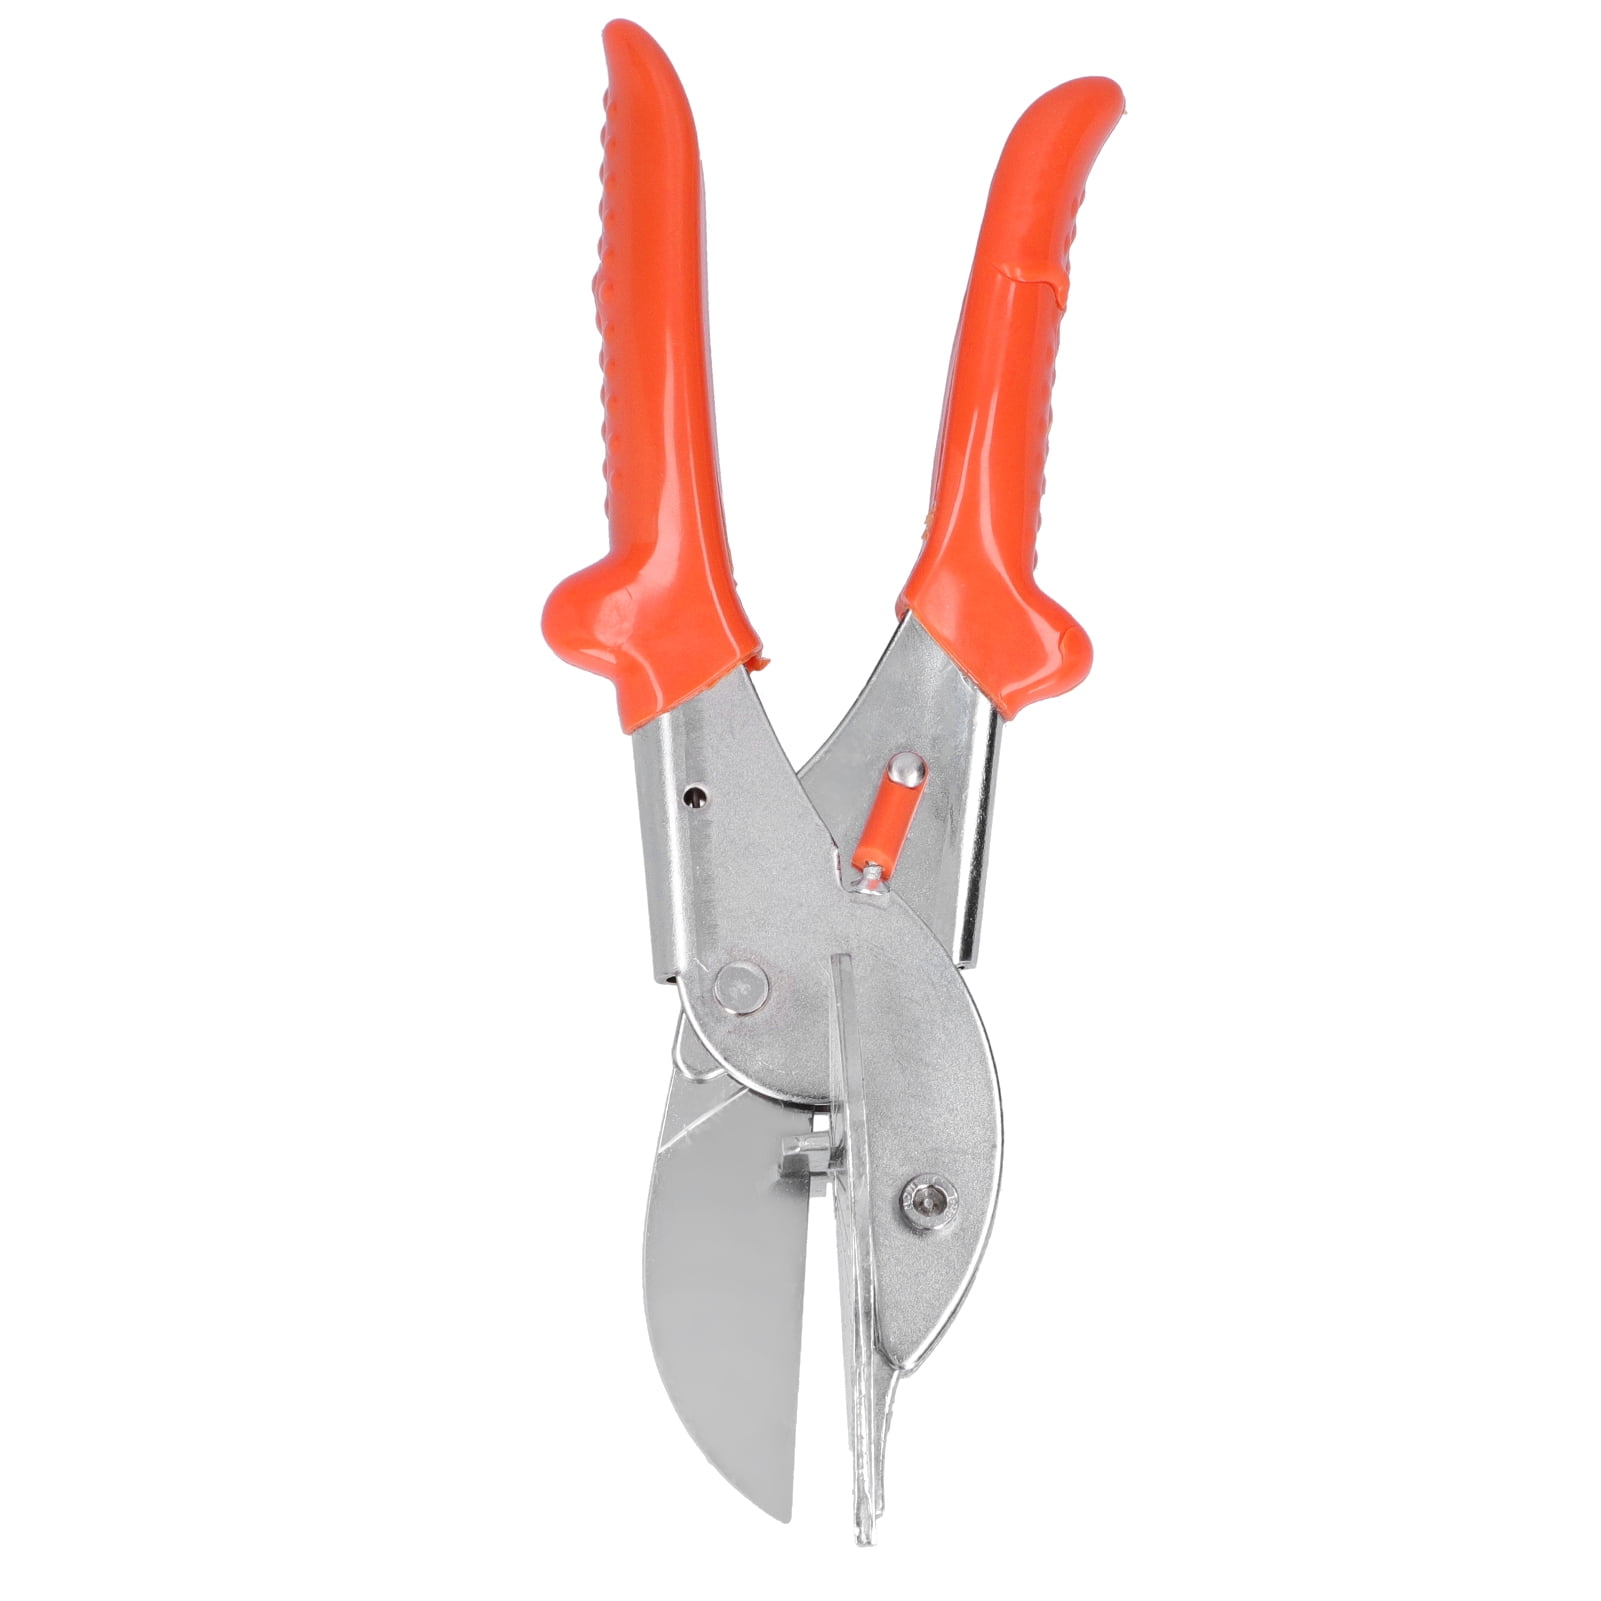 CarClothes Miter Snips-Professional Multi Angle Miter Shears Cutter(orange),With A Replacement Blade,Electrician Tools Miter snips,Accurately